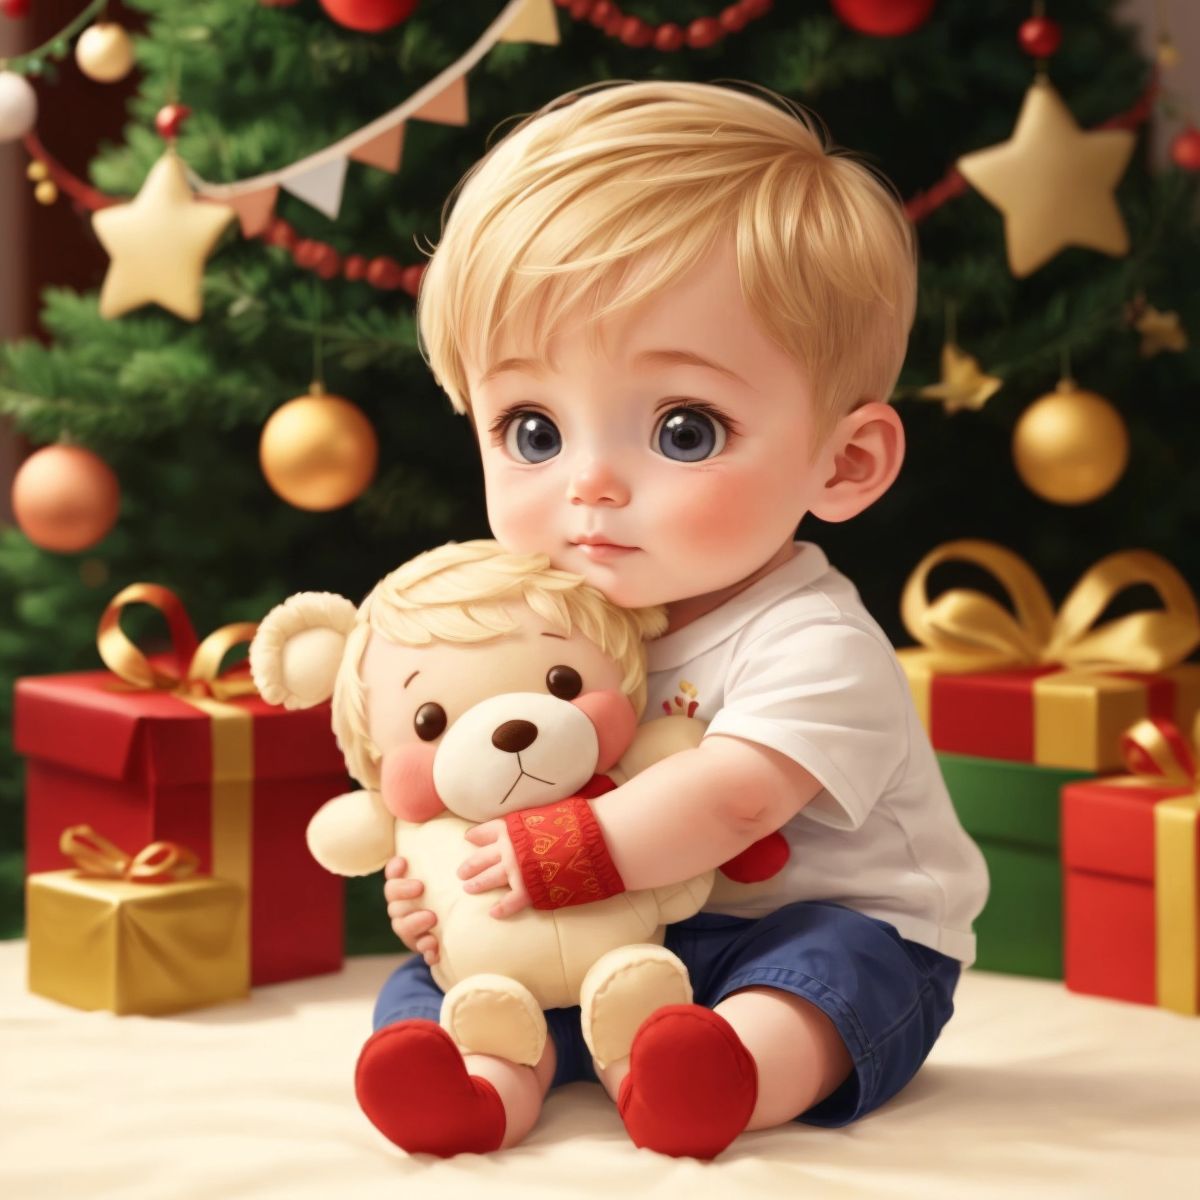 Emerson hugging a plush toy with affection, surrounded by festive decorations.